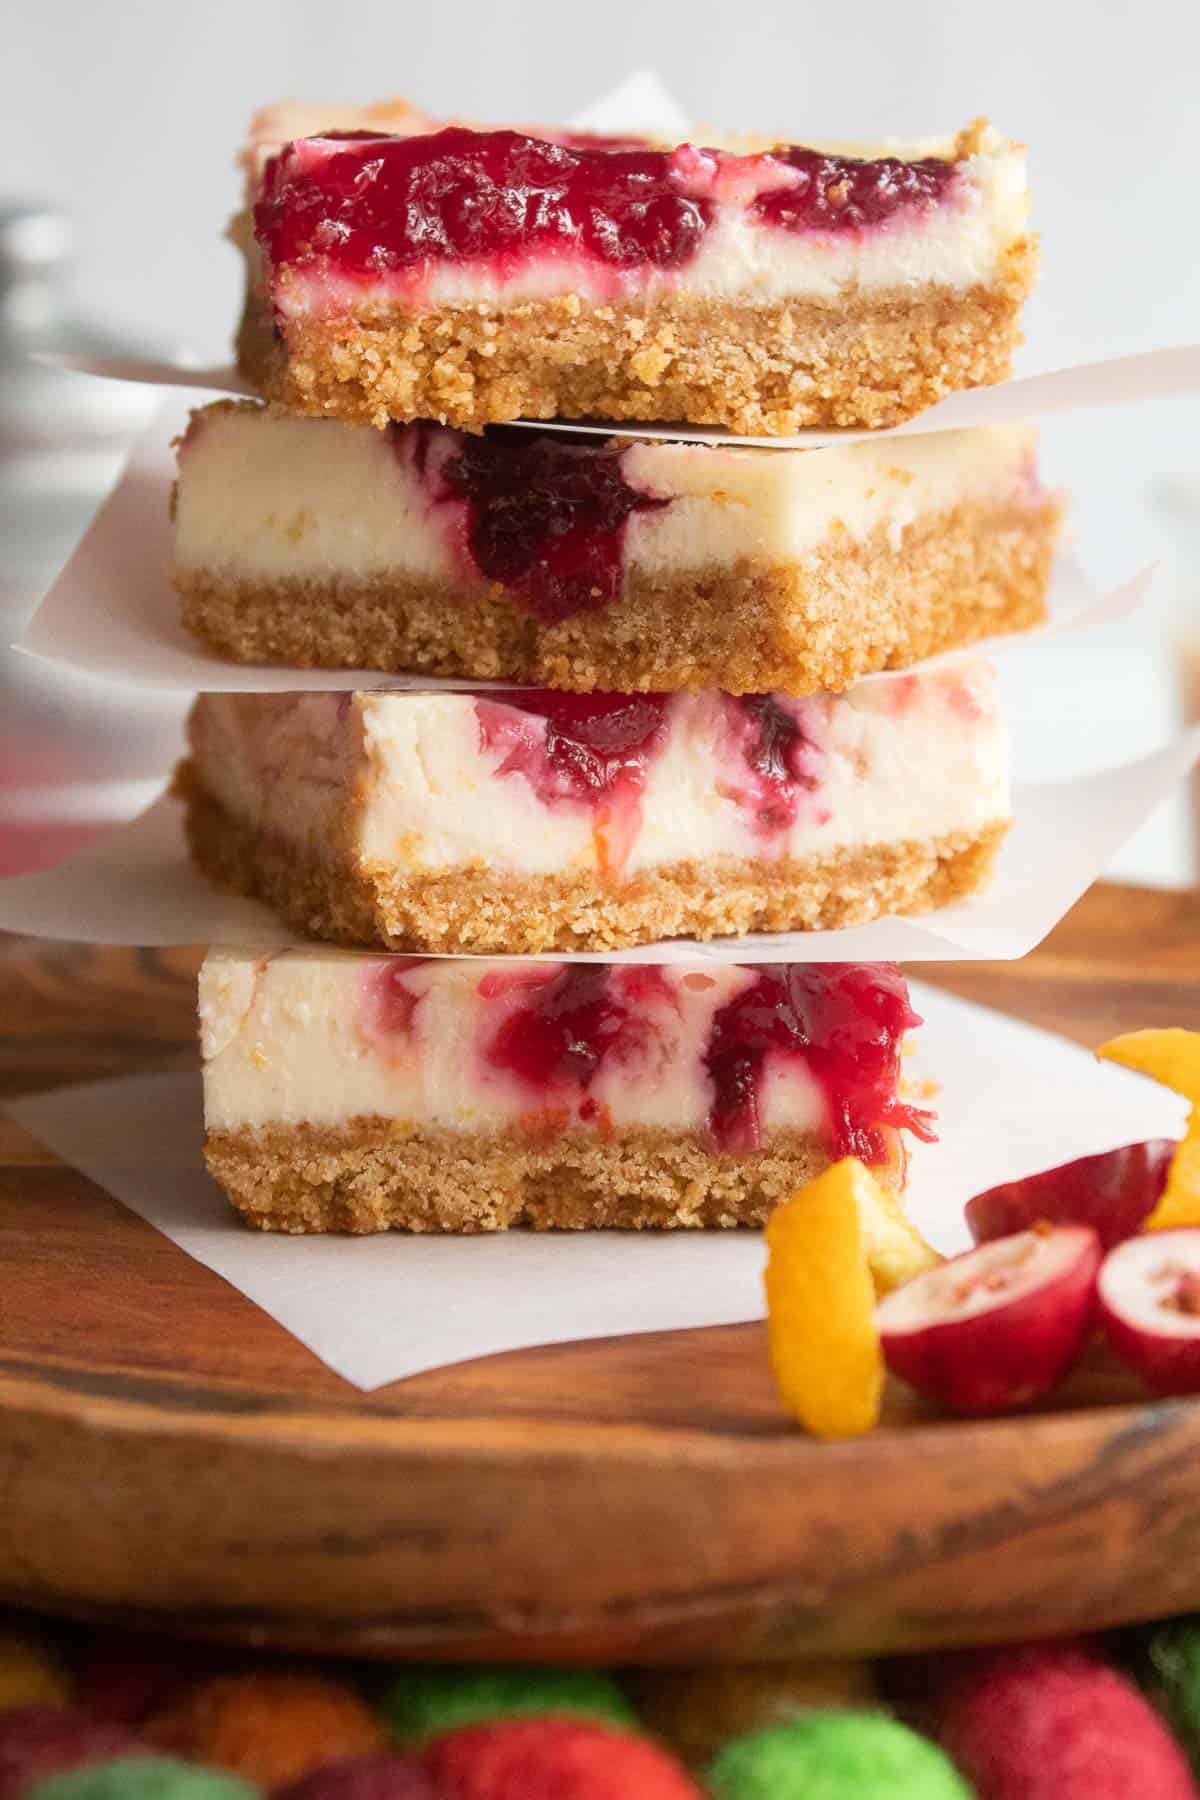 A stack of red and white dessert bars with brown graham cracker crust sitting on a wood plate.